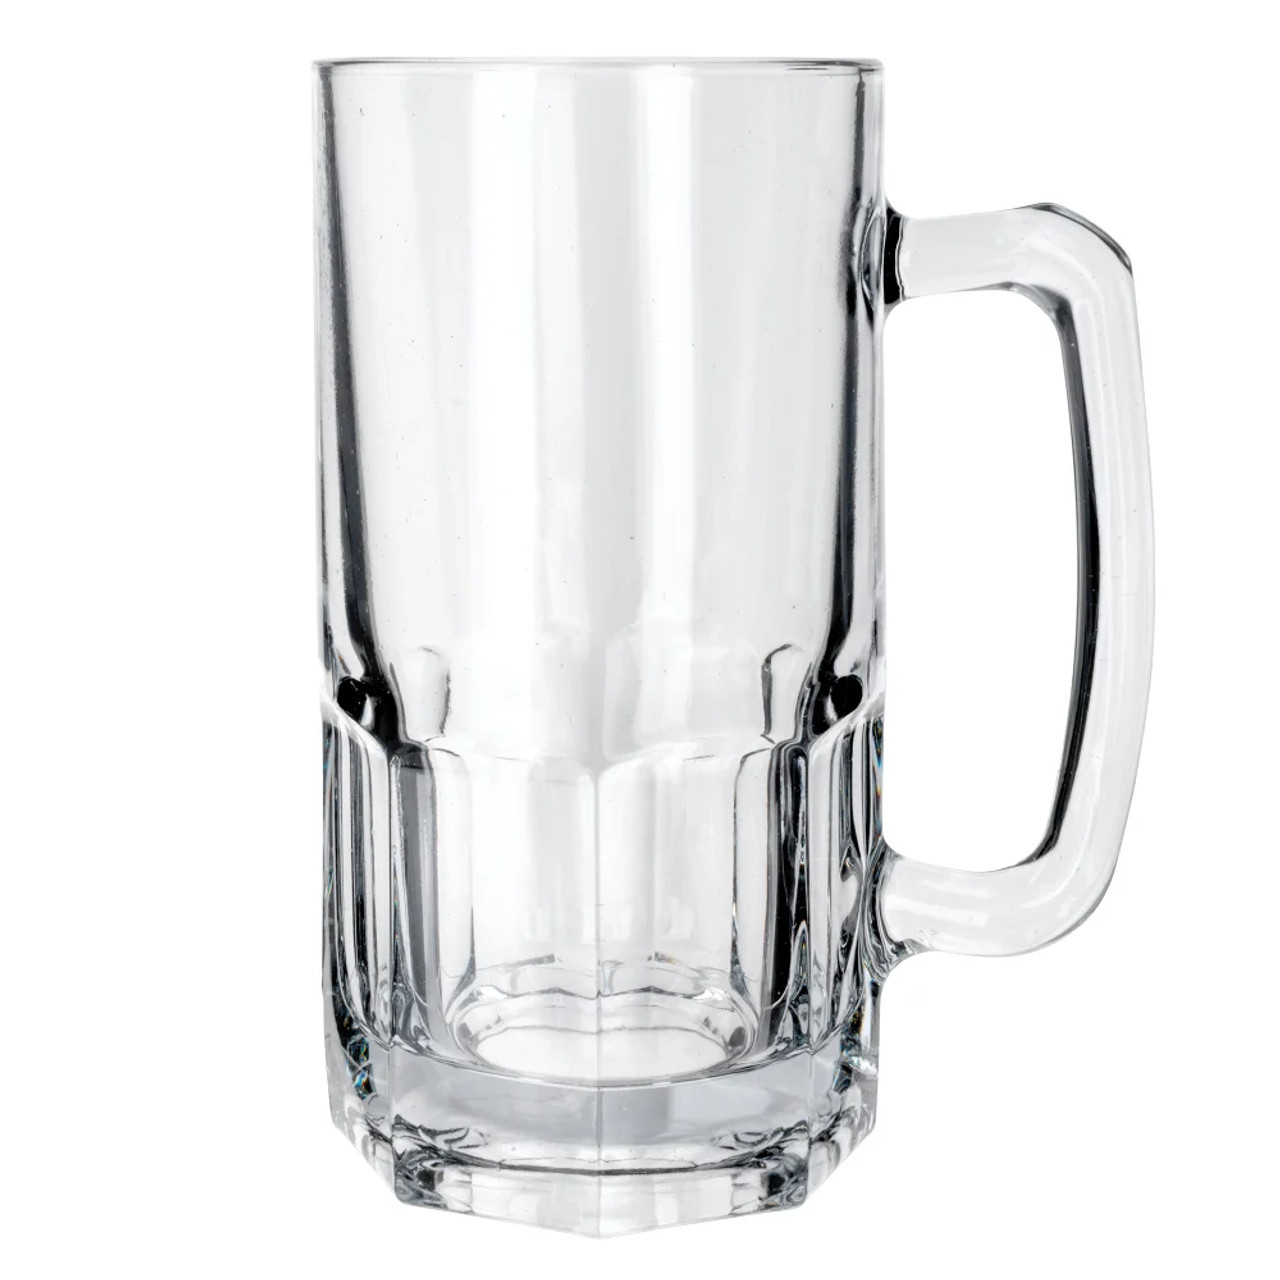 Anchor 1153U New Orleans Beer Mug - Large 34 oz Capacity, Clear Glass (12/Case) - Chicken Pieces